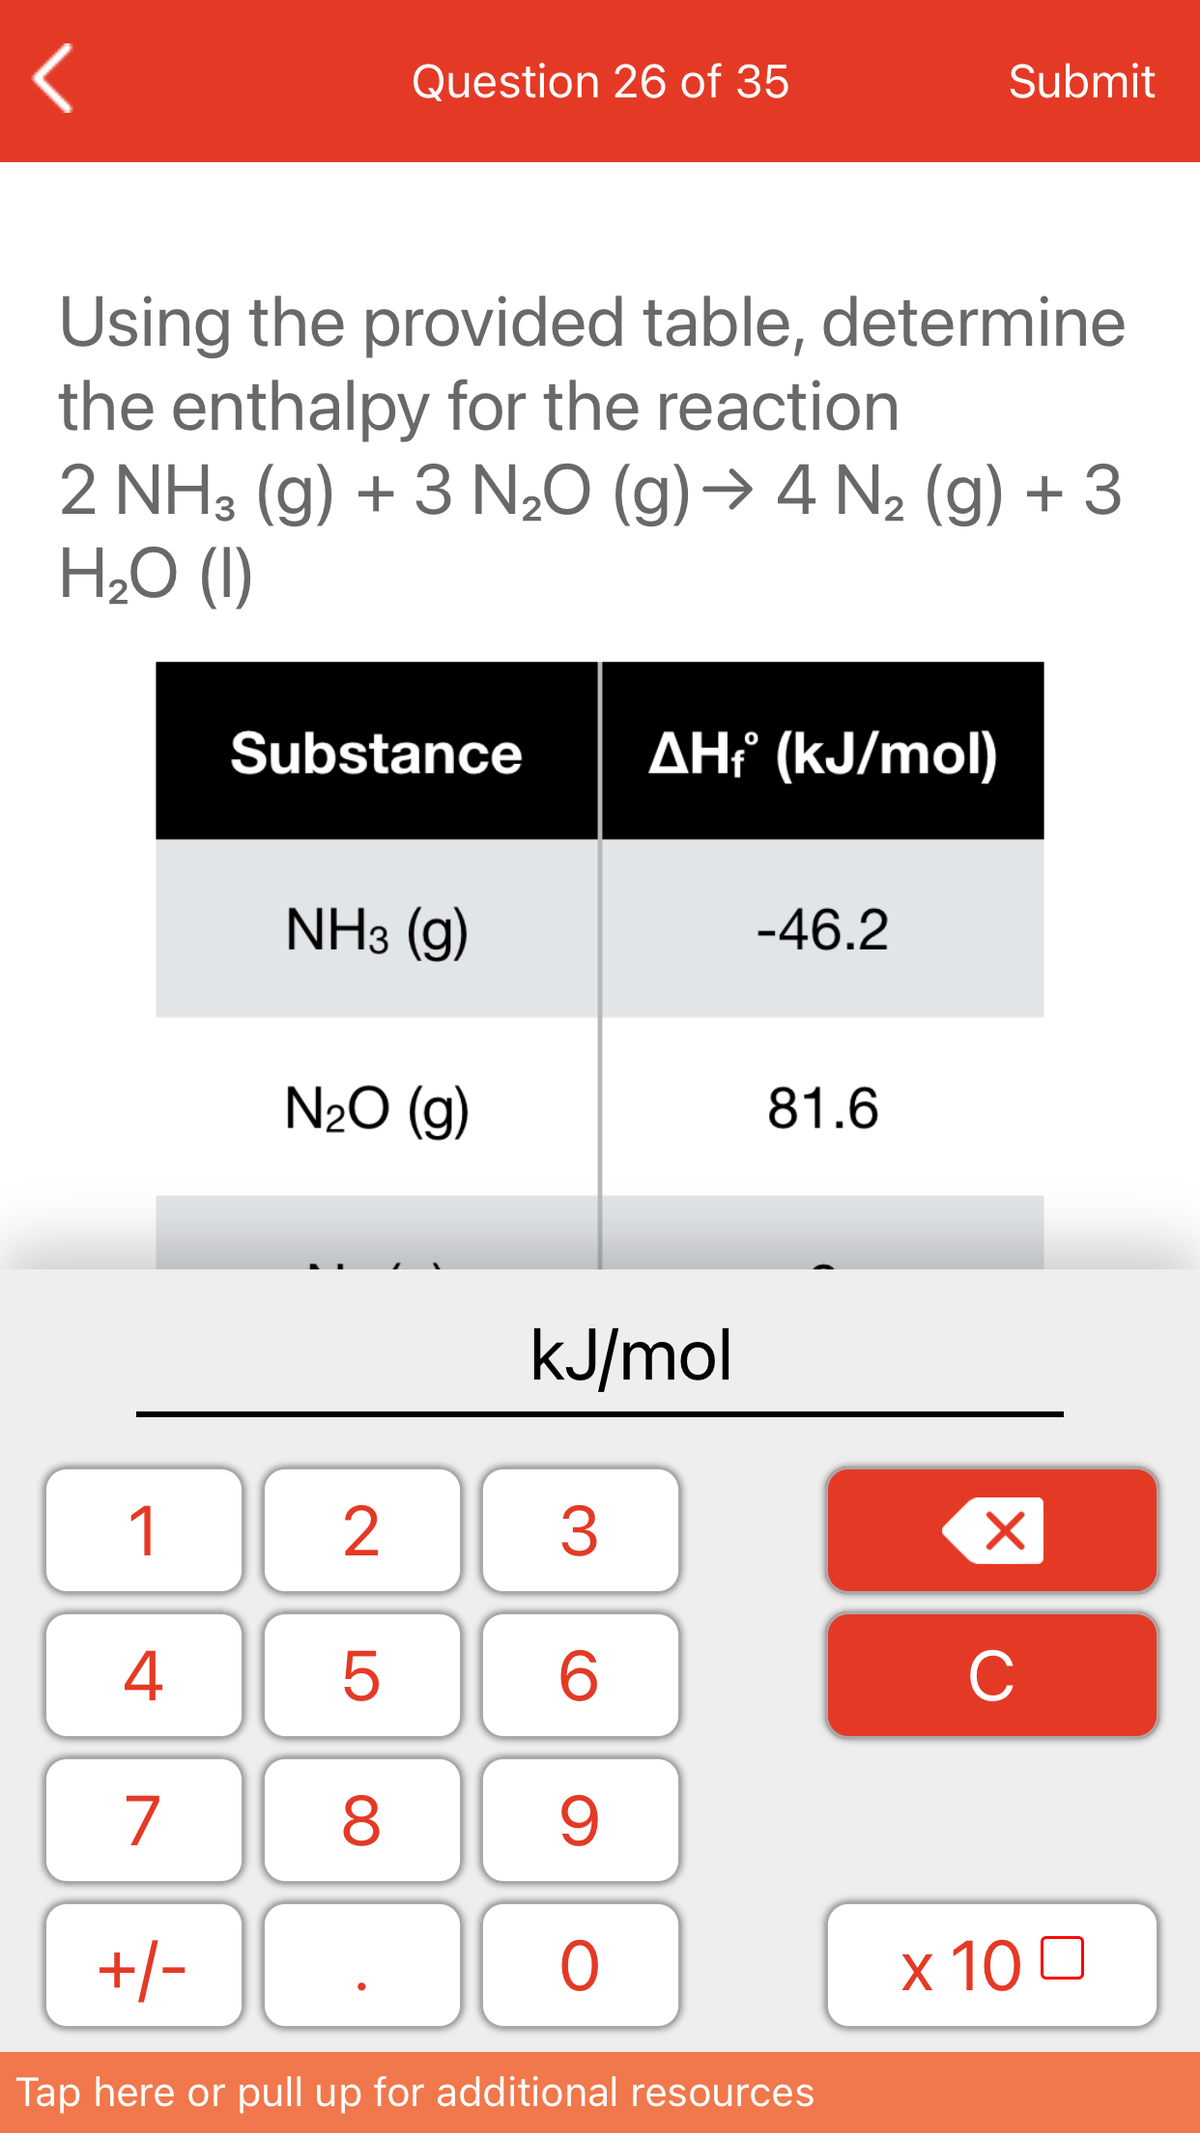 Question 26 of 35
Submit
Using the provided table, determine
the enthalpy for the reaction
2 NH3 (g) + 3 N20 (g)→ 4 N2 (g) + 3
H2O (I)
Substance
AHť (kJ/mol)
NH3 (g)
-46.2
N20 (g)
81.6
kJ/mol
1
4
C
7
+/-
x 10 0
Tap here or pull up for additional resources
LO
00
